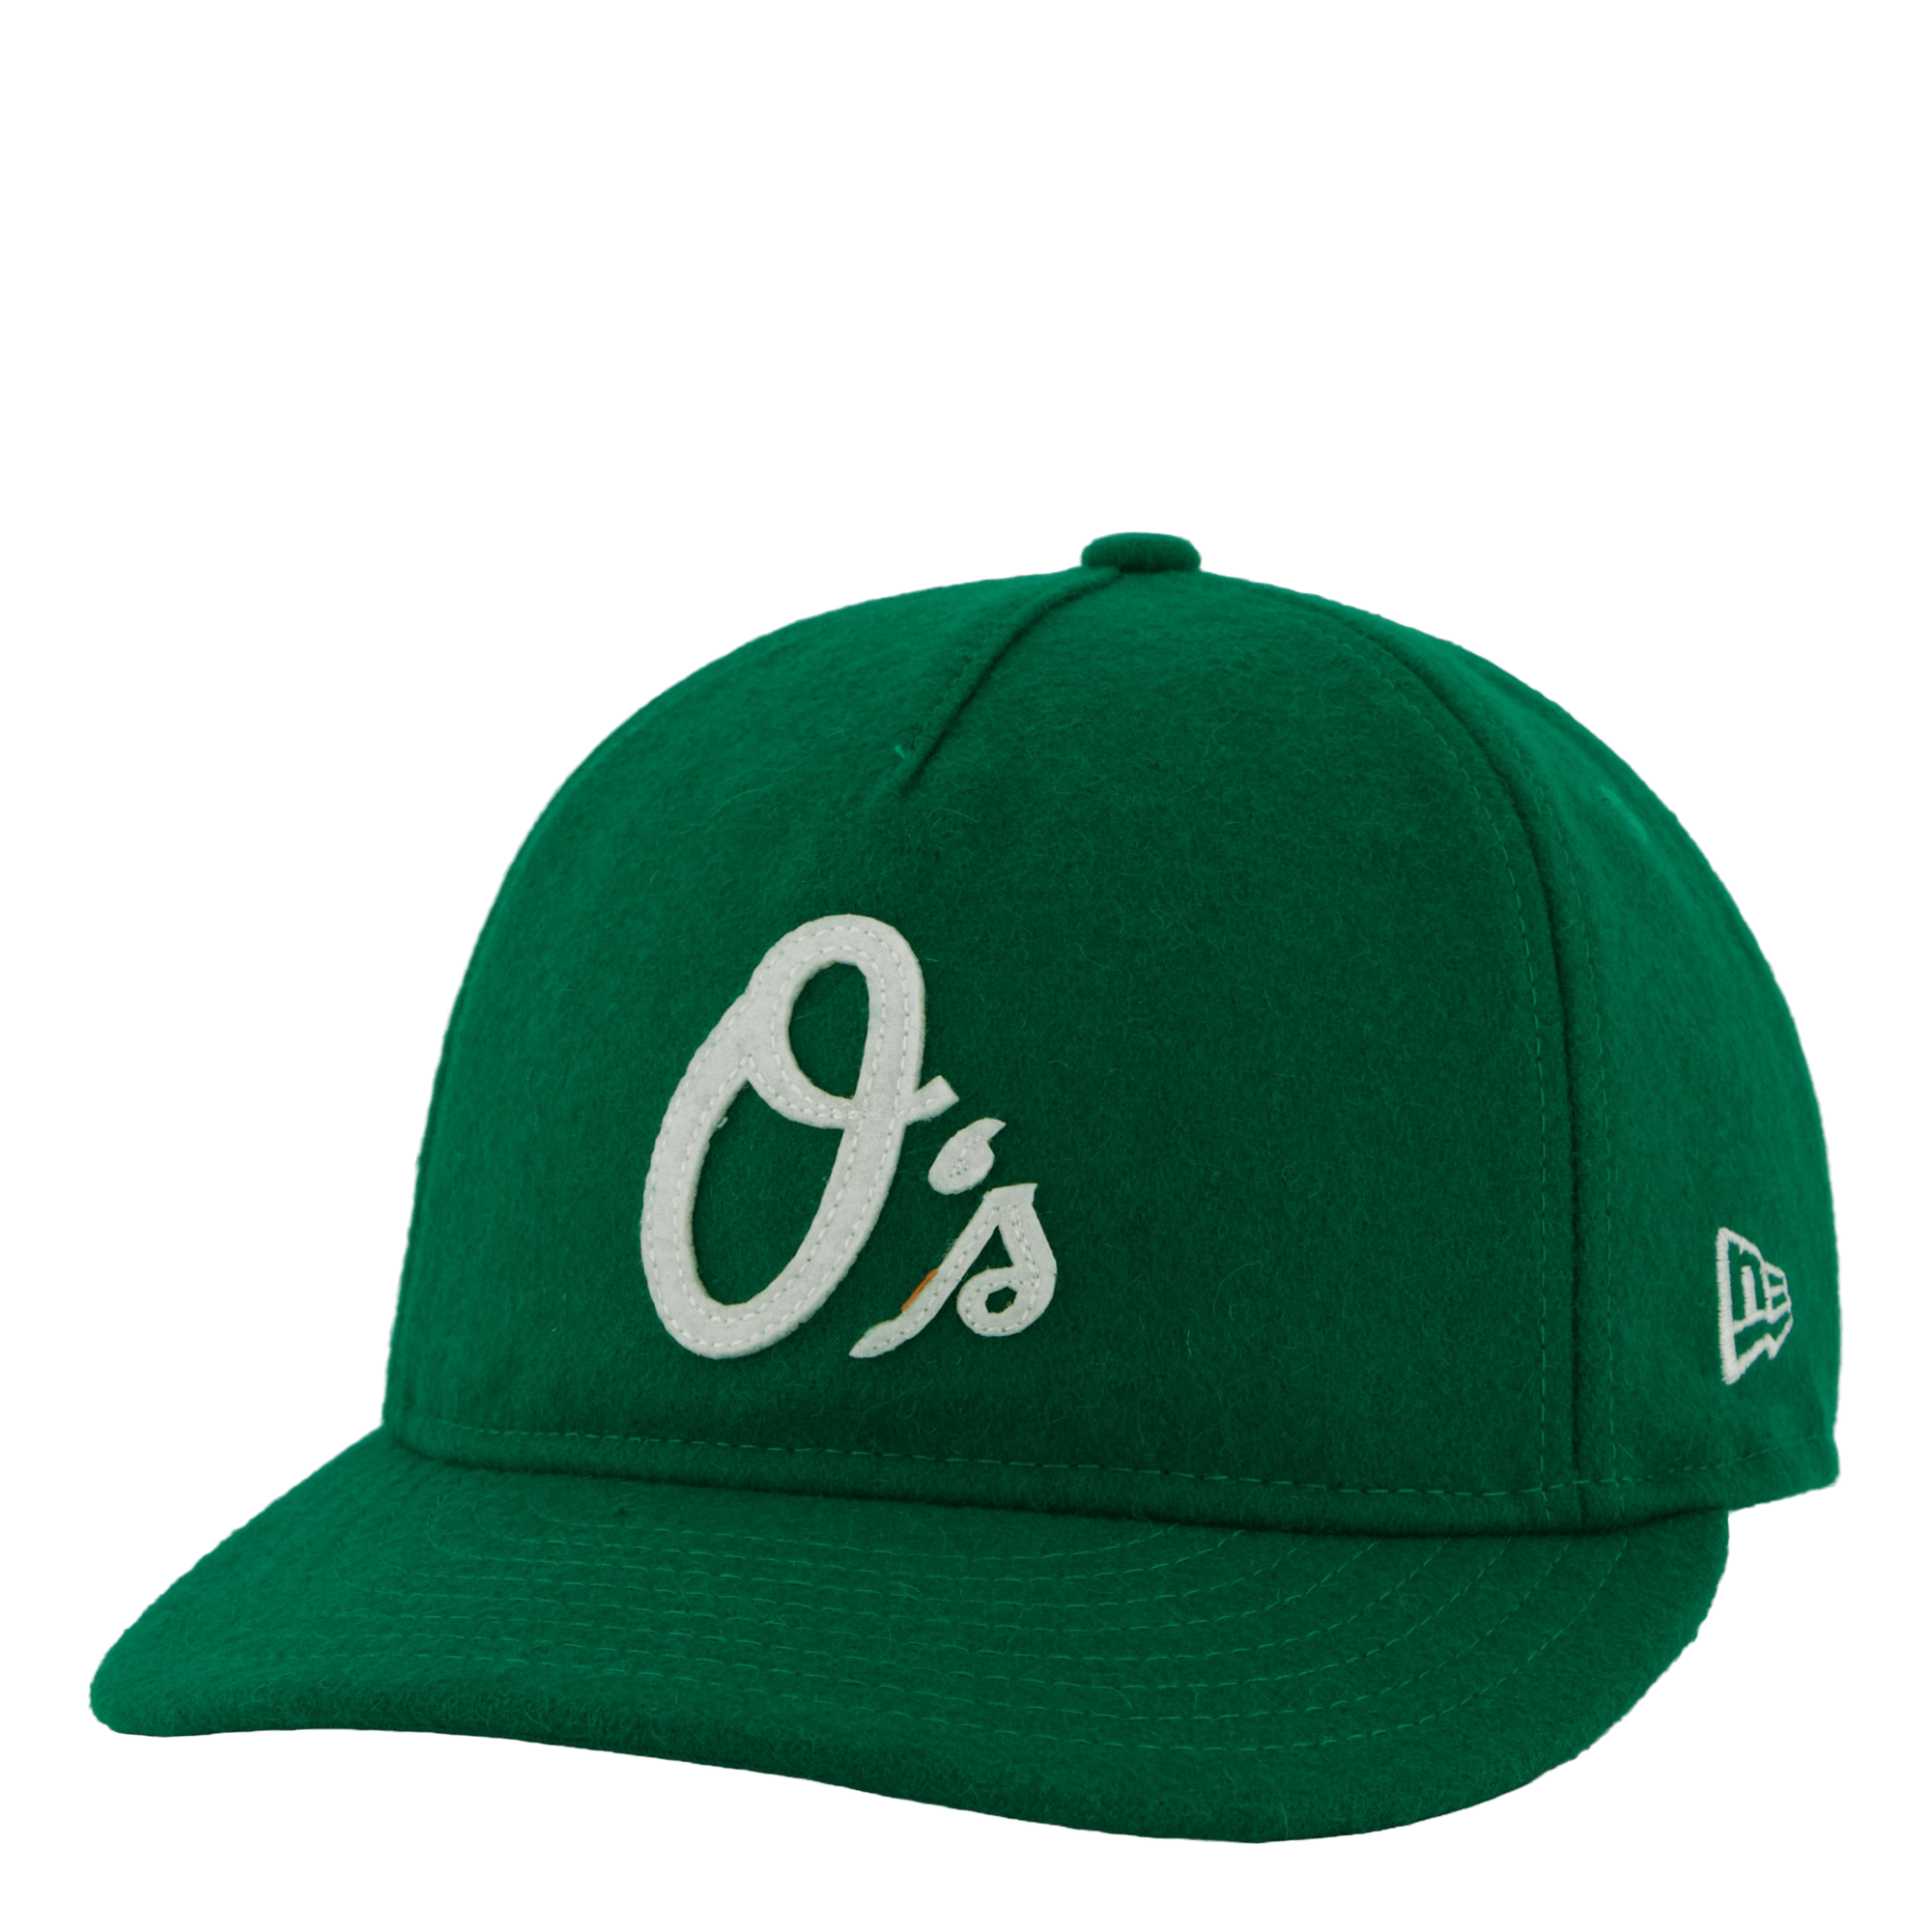 Mlb Coop 9fifty Rc Orioles Kgr